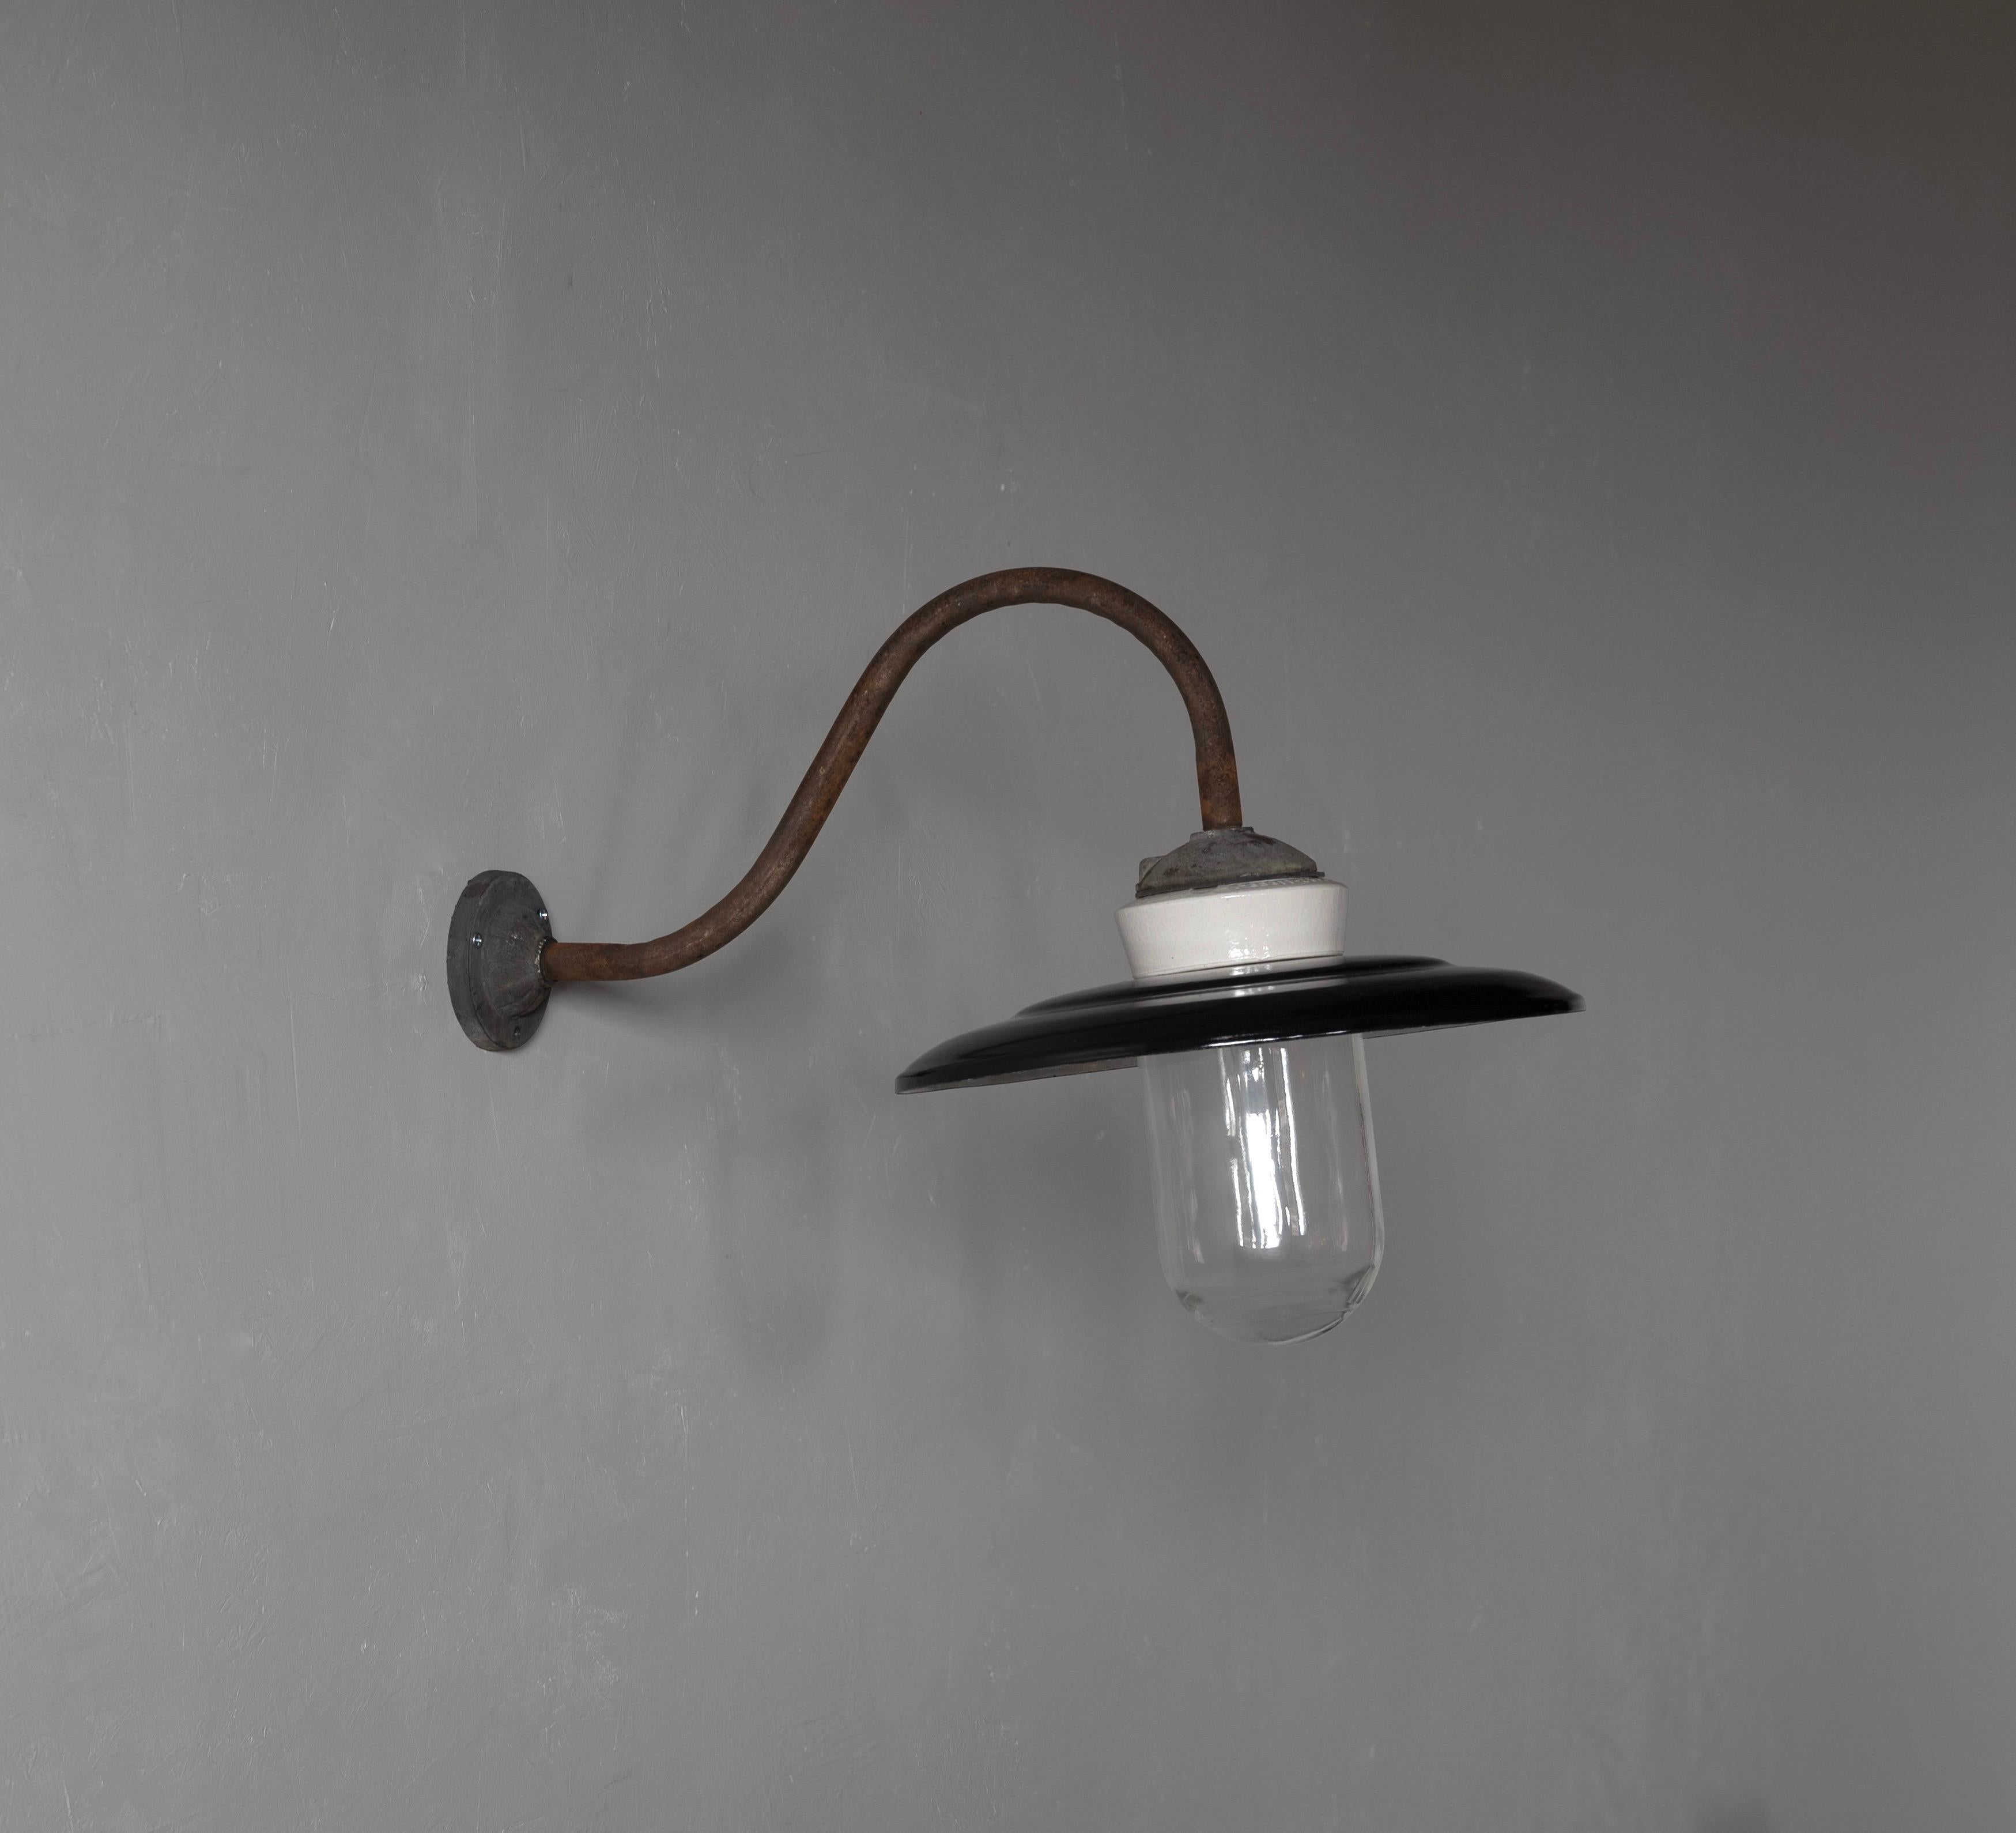 A pair wall light. Designed and produced in Denmark, c. 1930s-1940s. Features iron, porcelain black-lacquered metal, glass

Fixture presents with dramatic and beautiful patina.

Three arm brass wall light with frost glass. Engraved on the front of